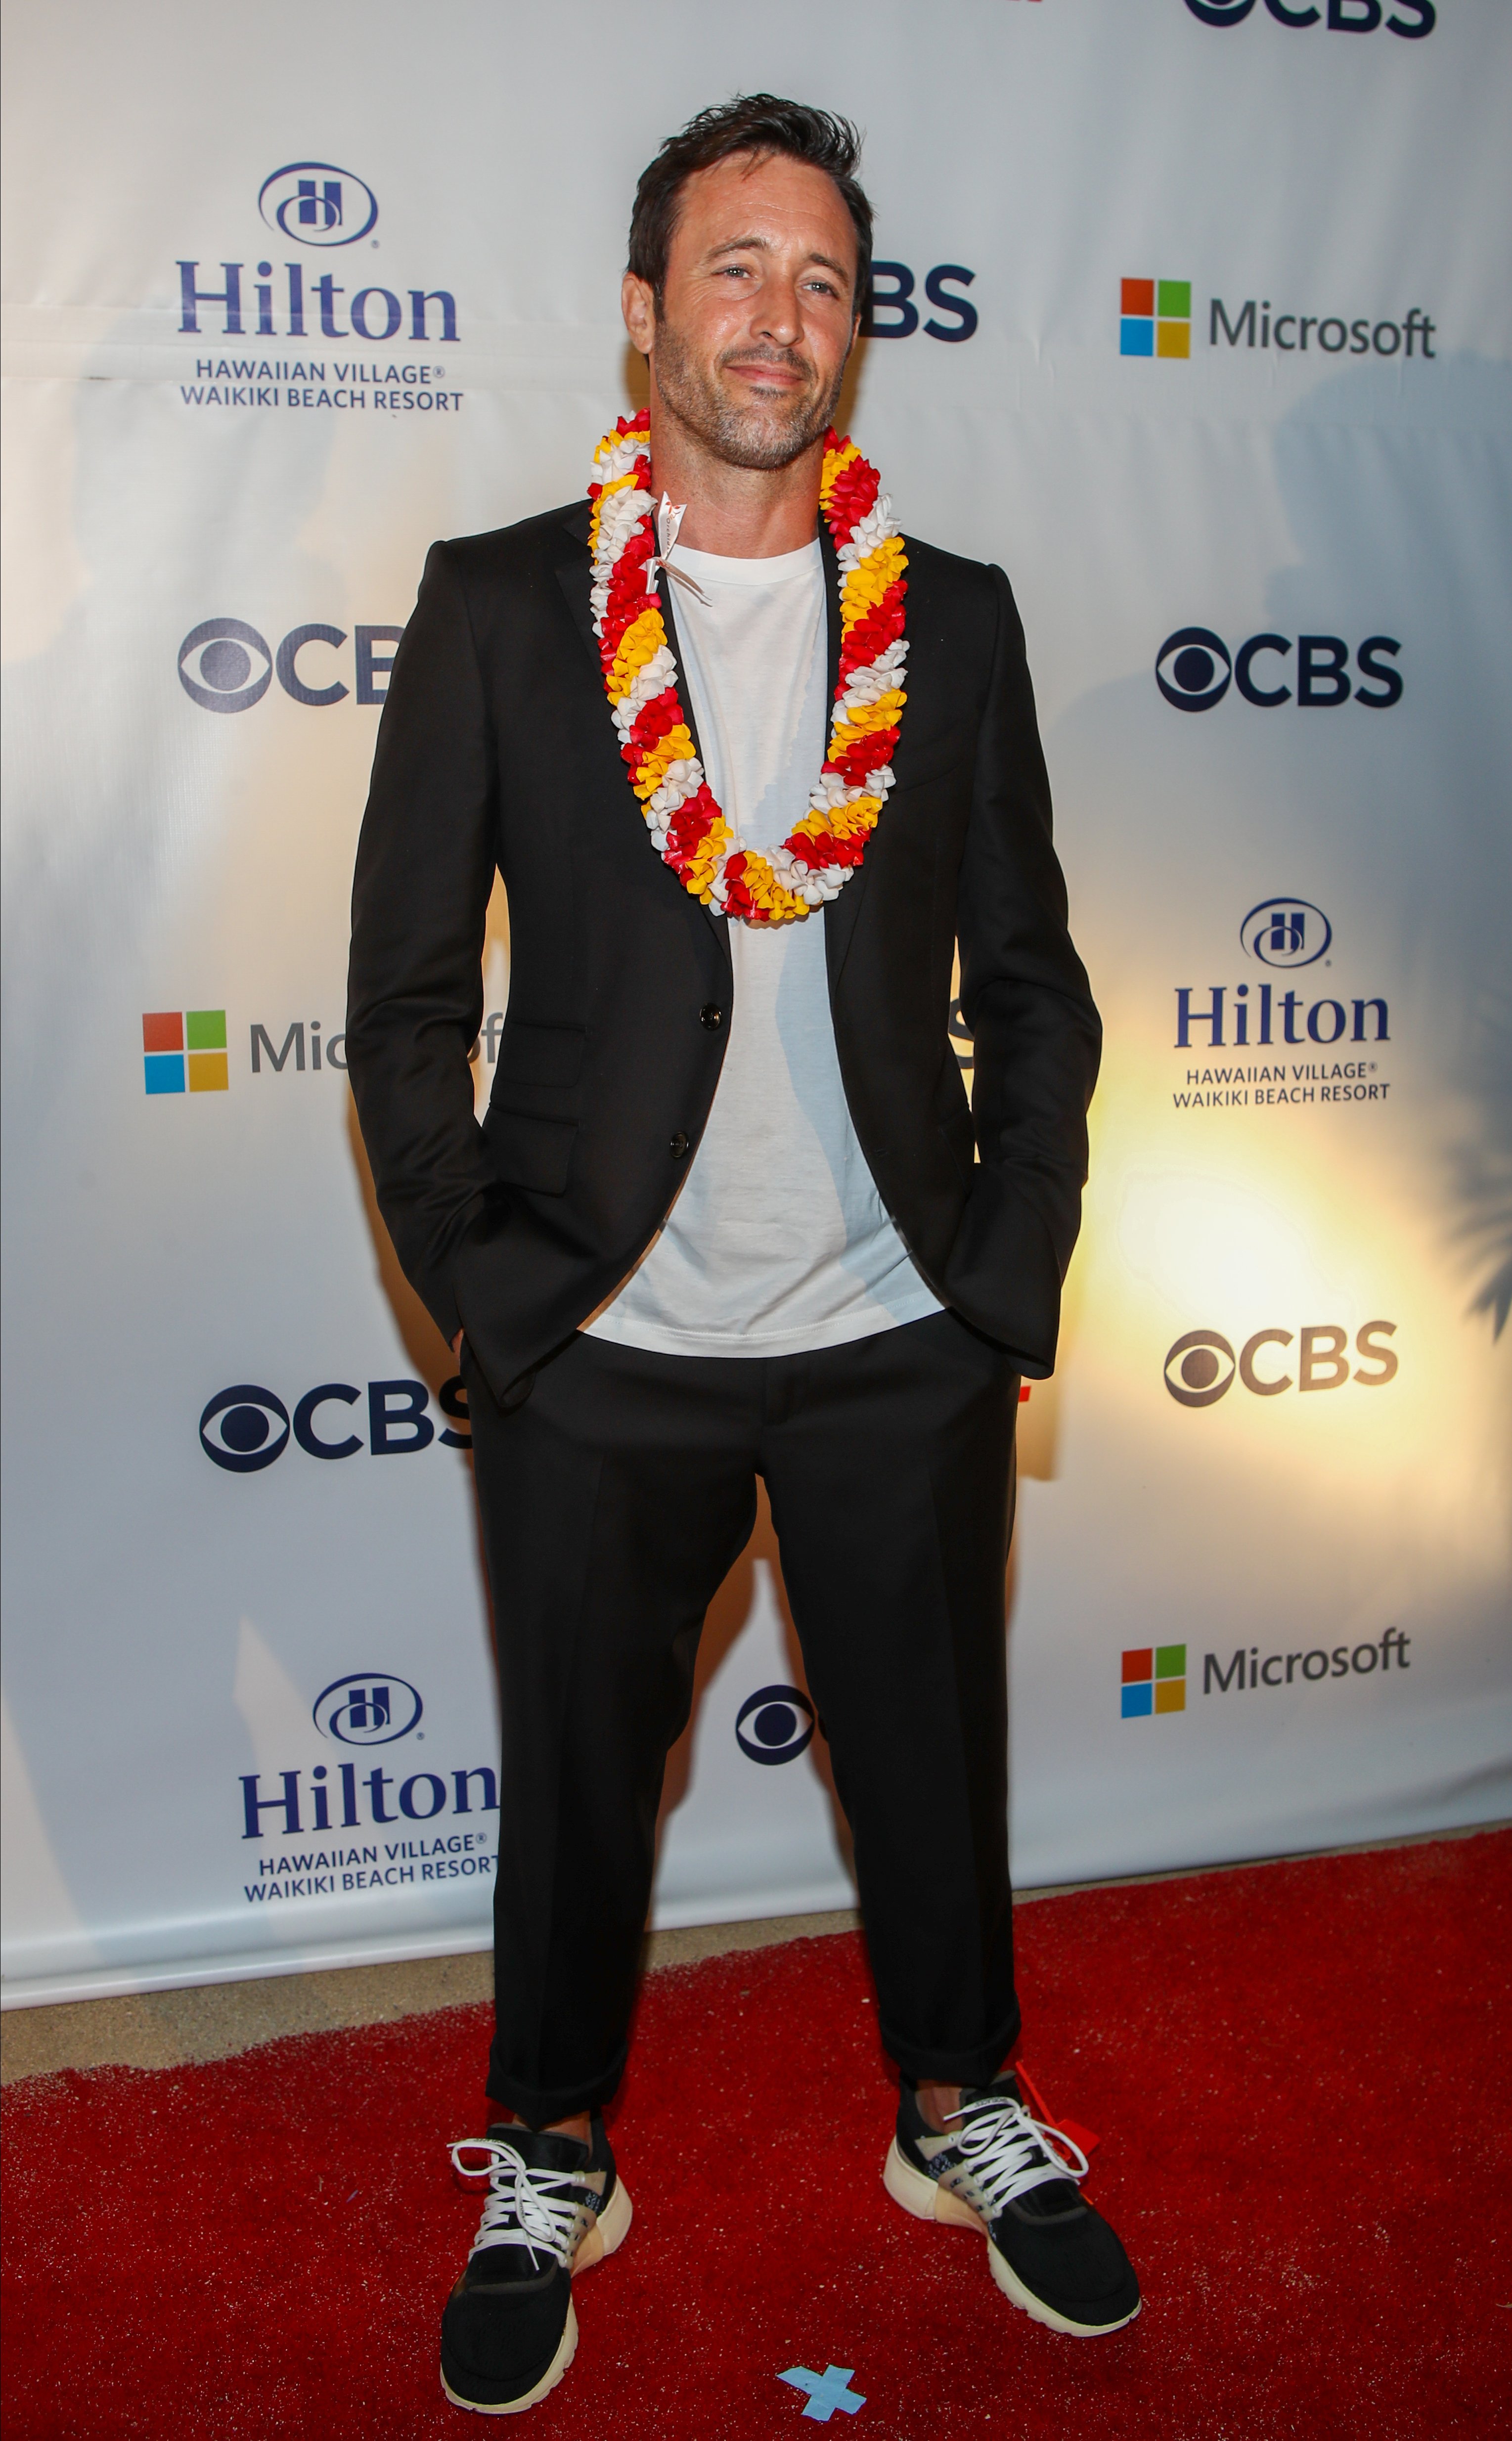 Alex OLoughlin at the Sunset On The Beach event celebrating the 10th season of "Hawaii Five-0" and season 2 of "Magnum P.I." on September 19, 2019, in Hawaii. | Source: Getty Images